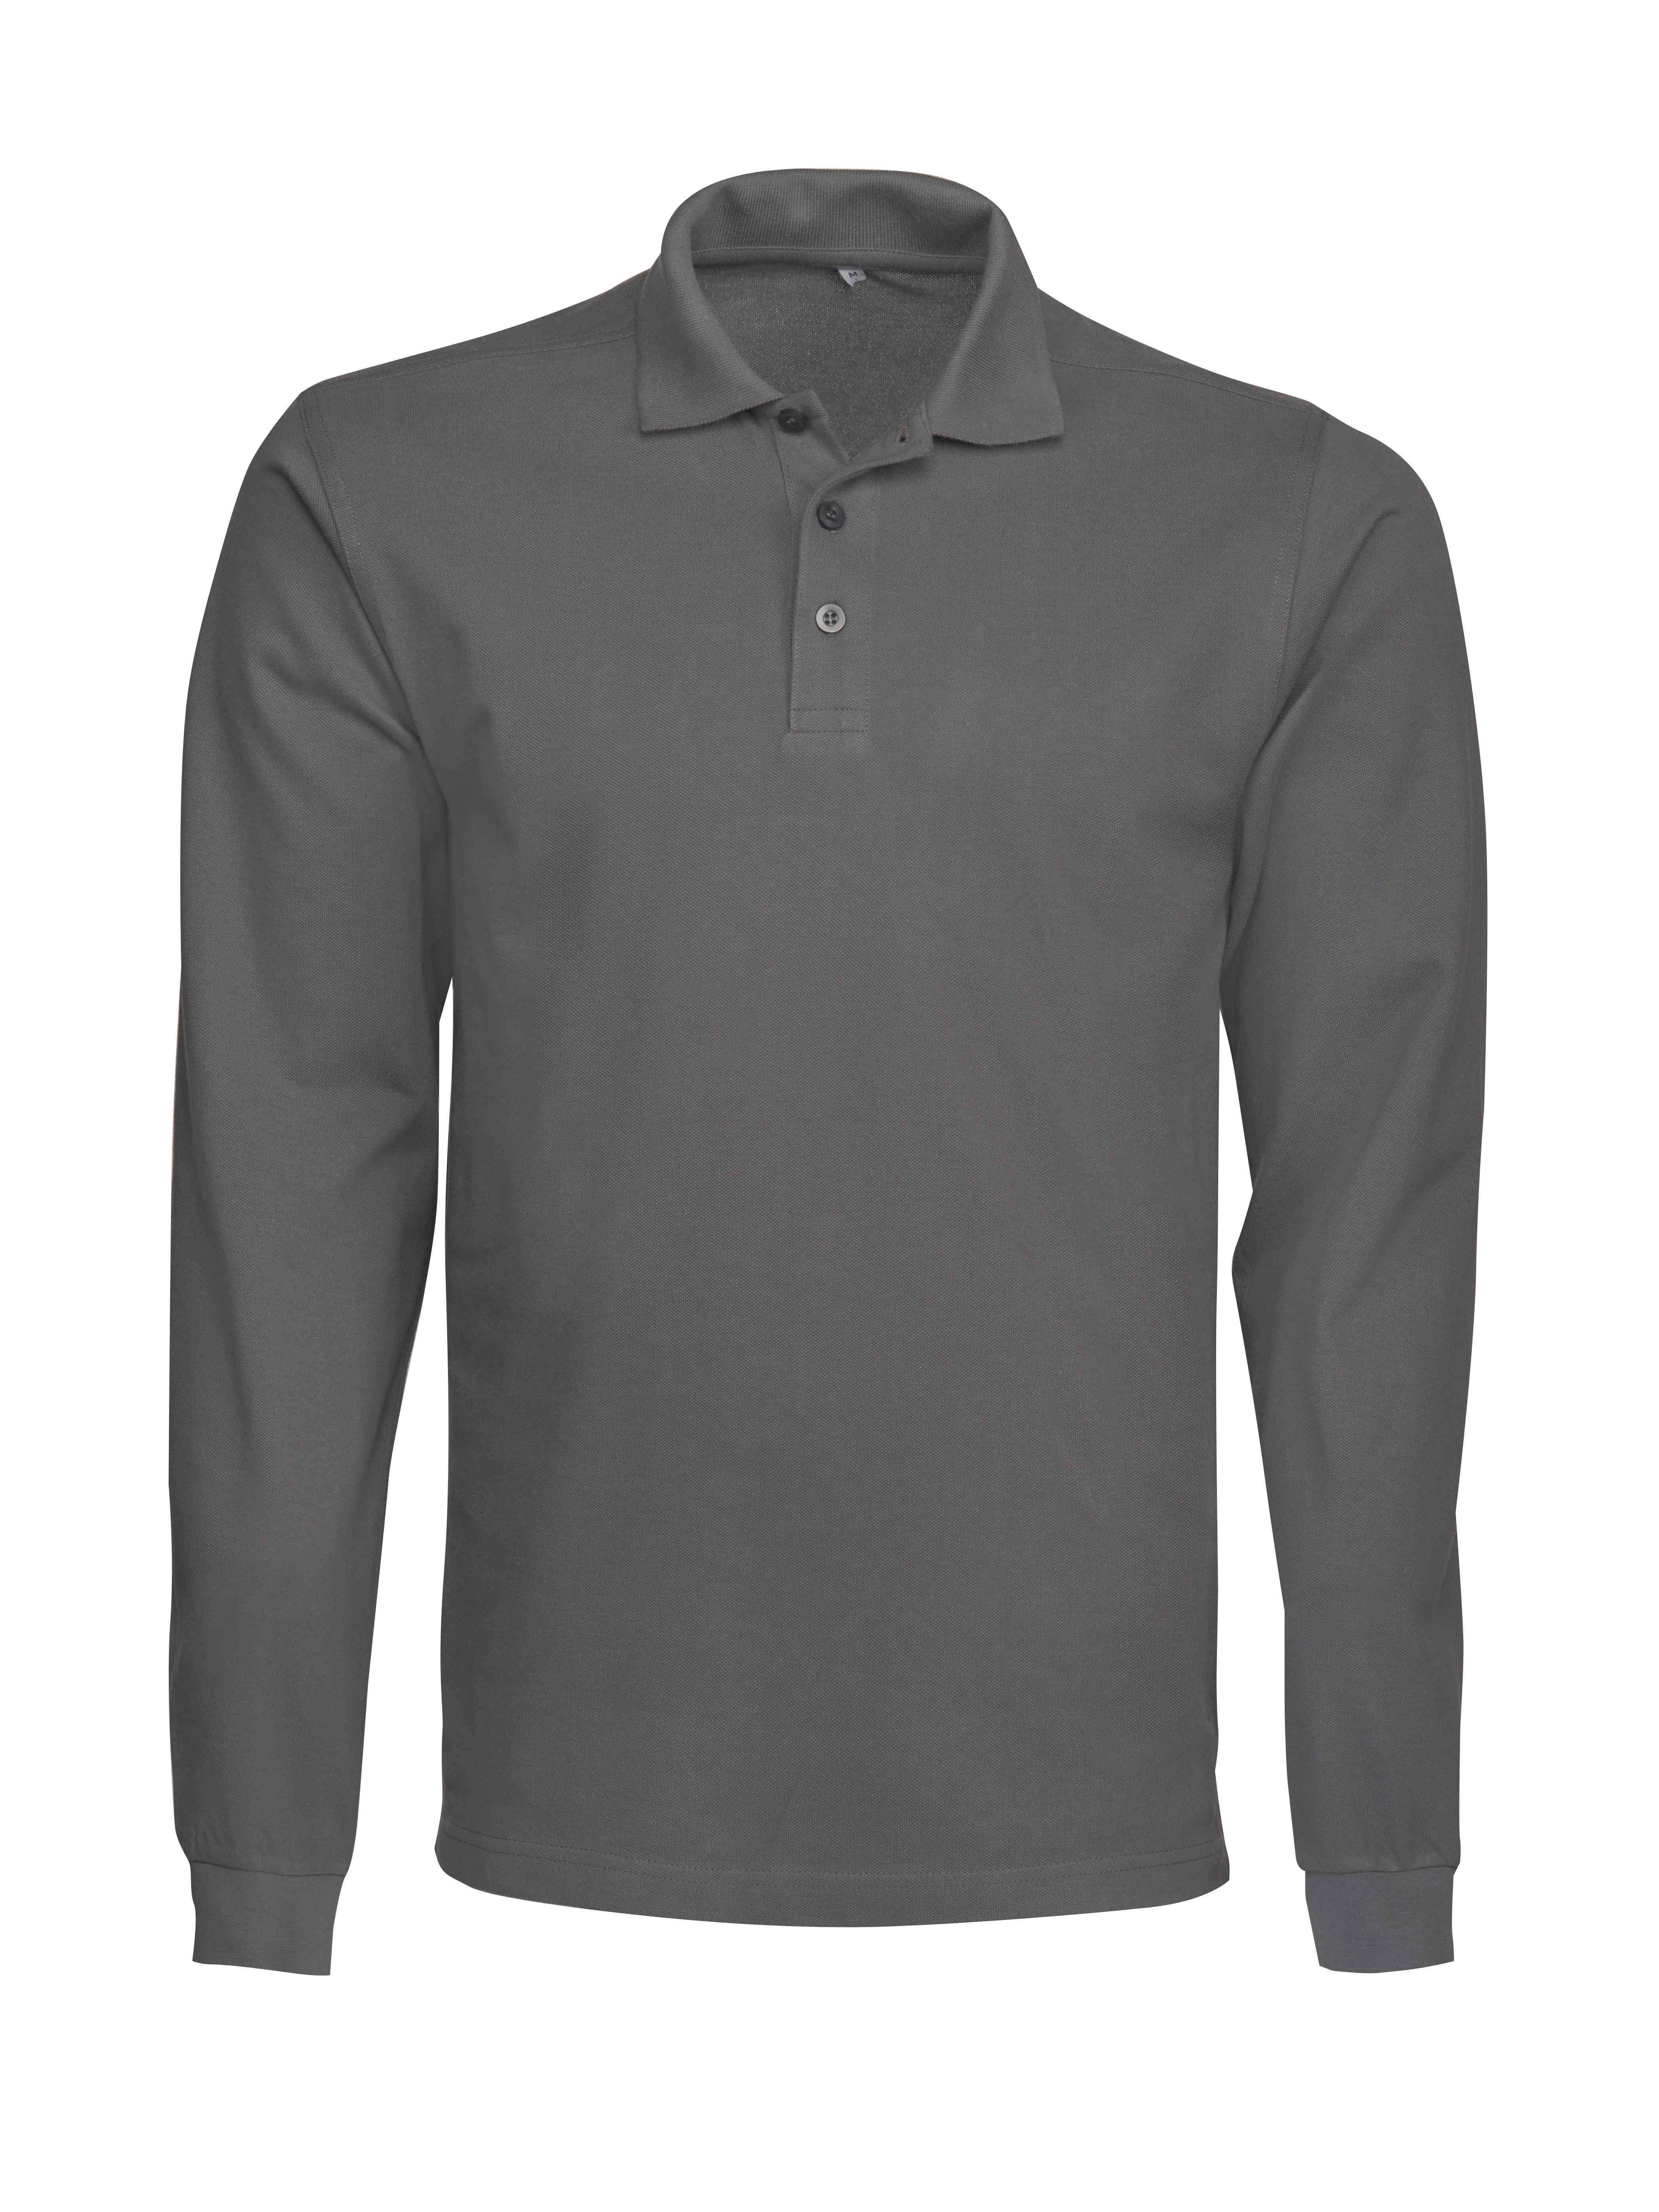 SURF POLO RSX L/S STEEL GREY PE-2265011-935-9